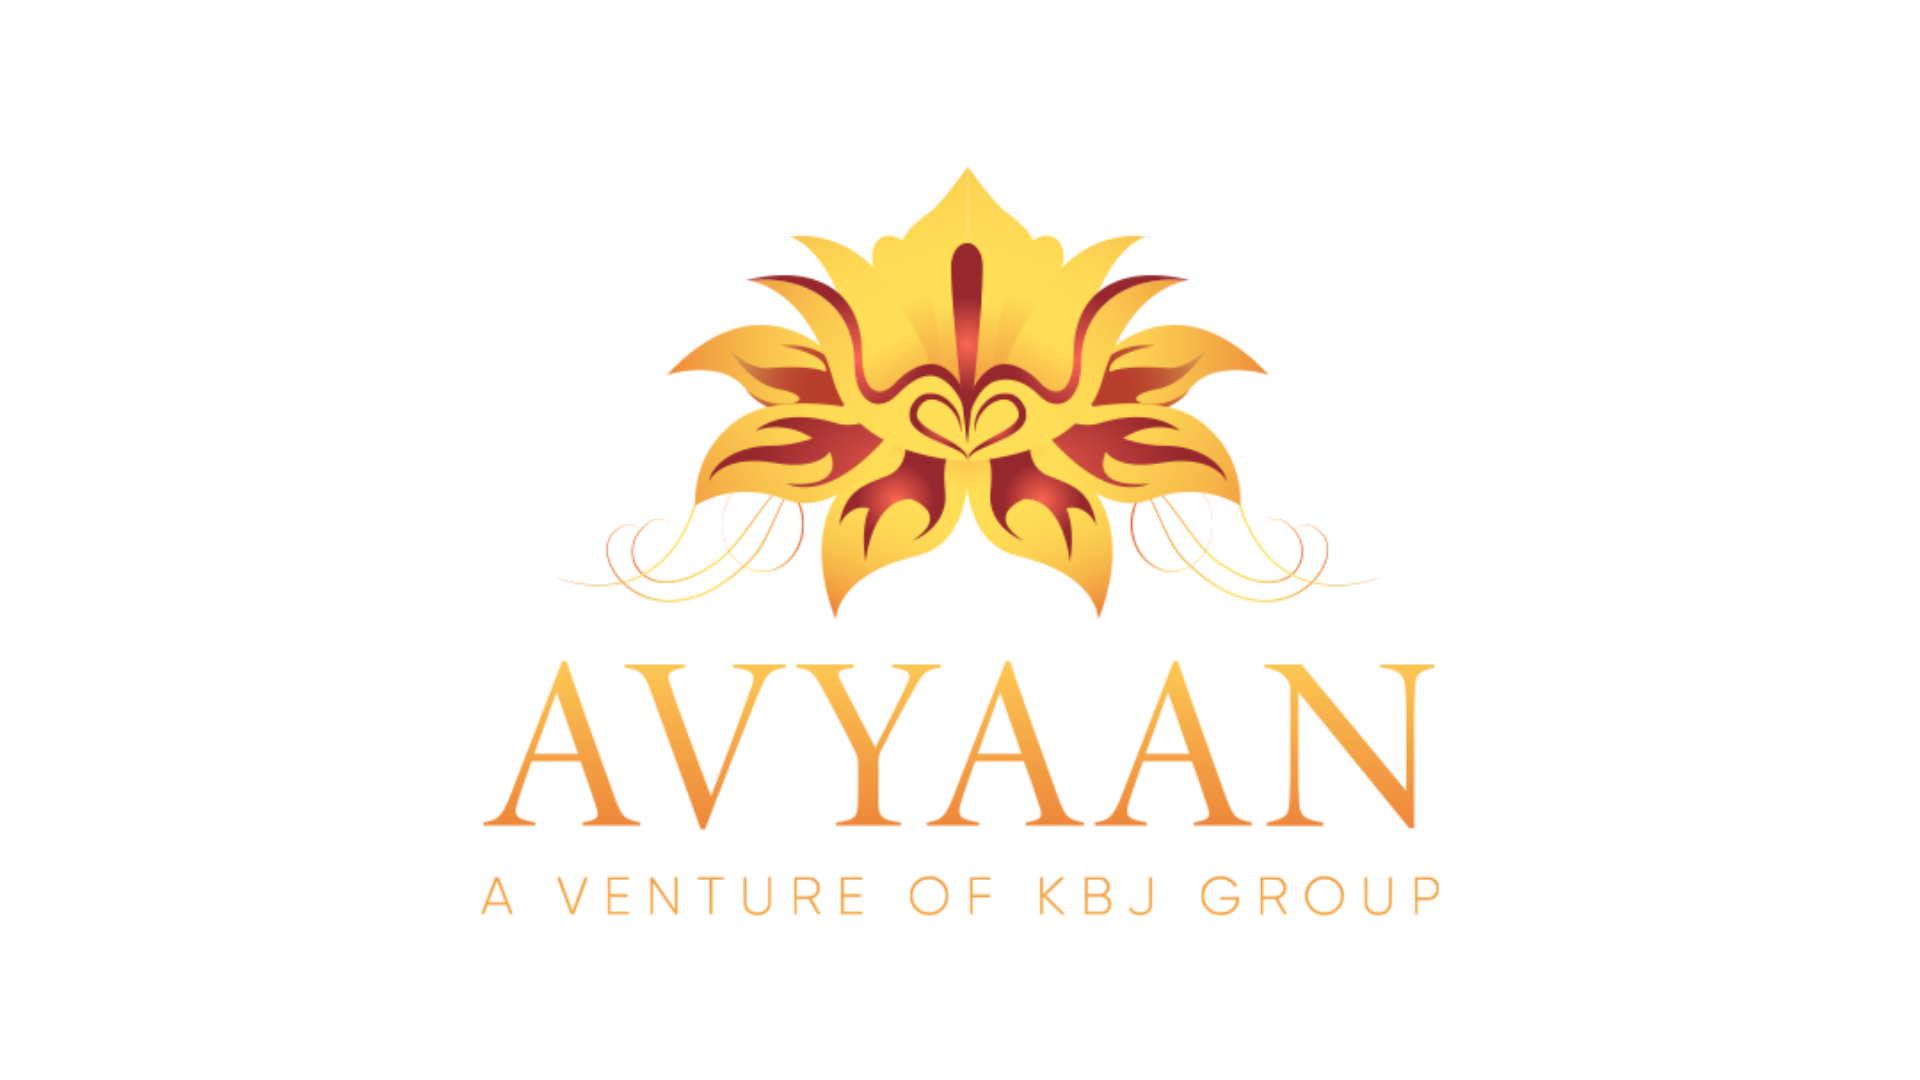 KBJ Group ventures into manufacturing and export of precious and alternative jewellery, launches Avyaan Bullion and Jewellery